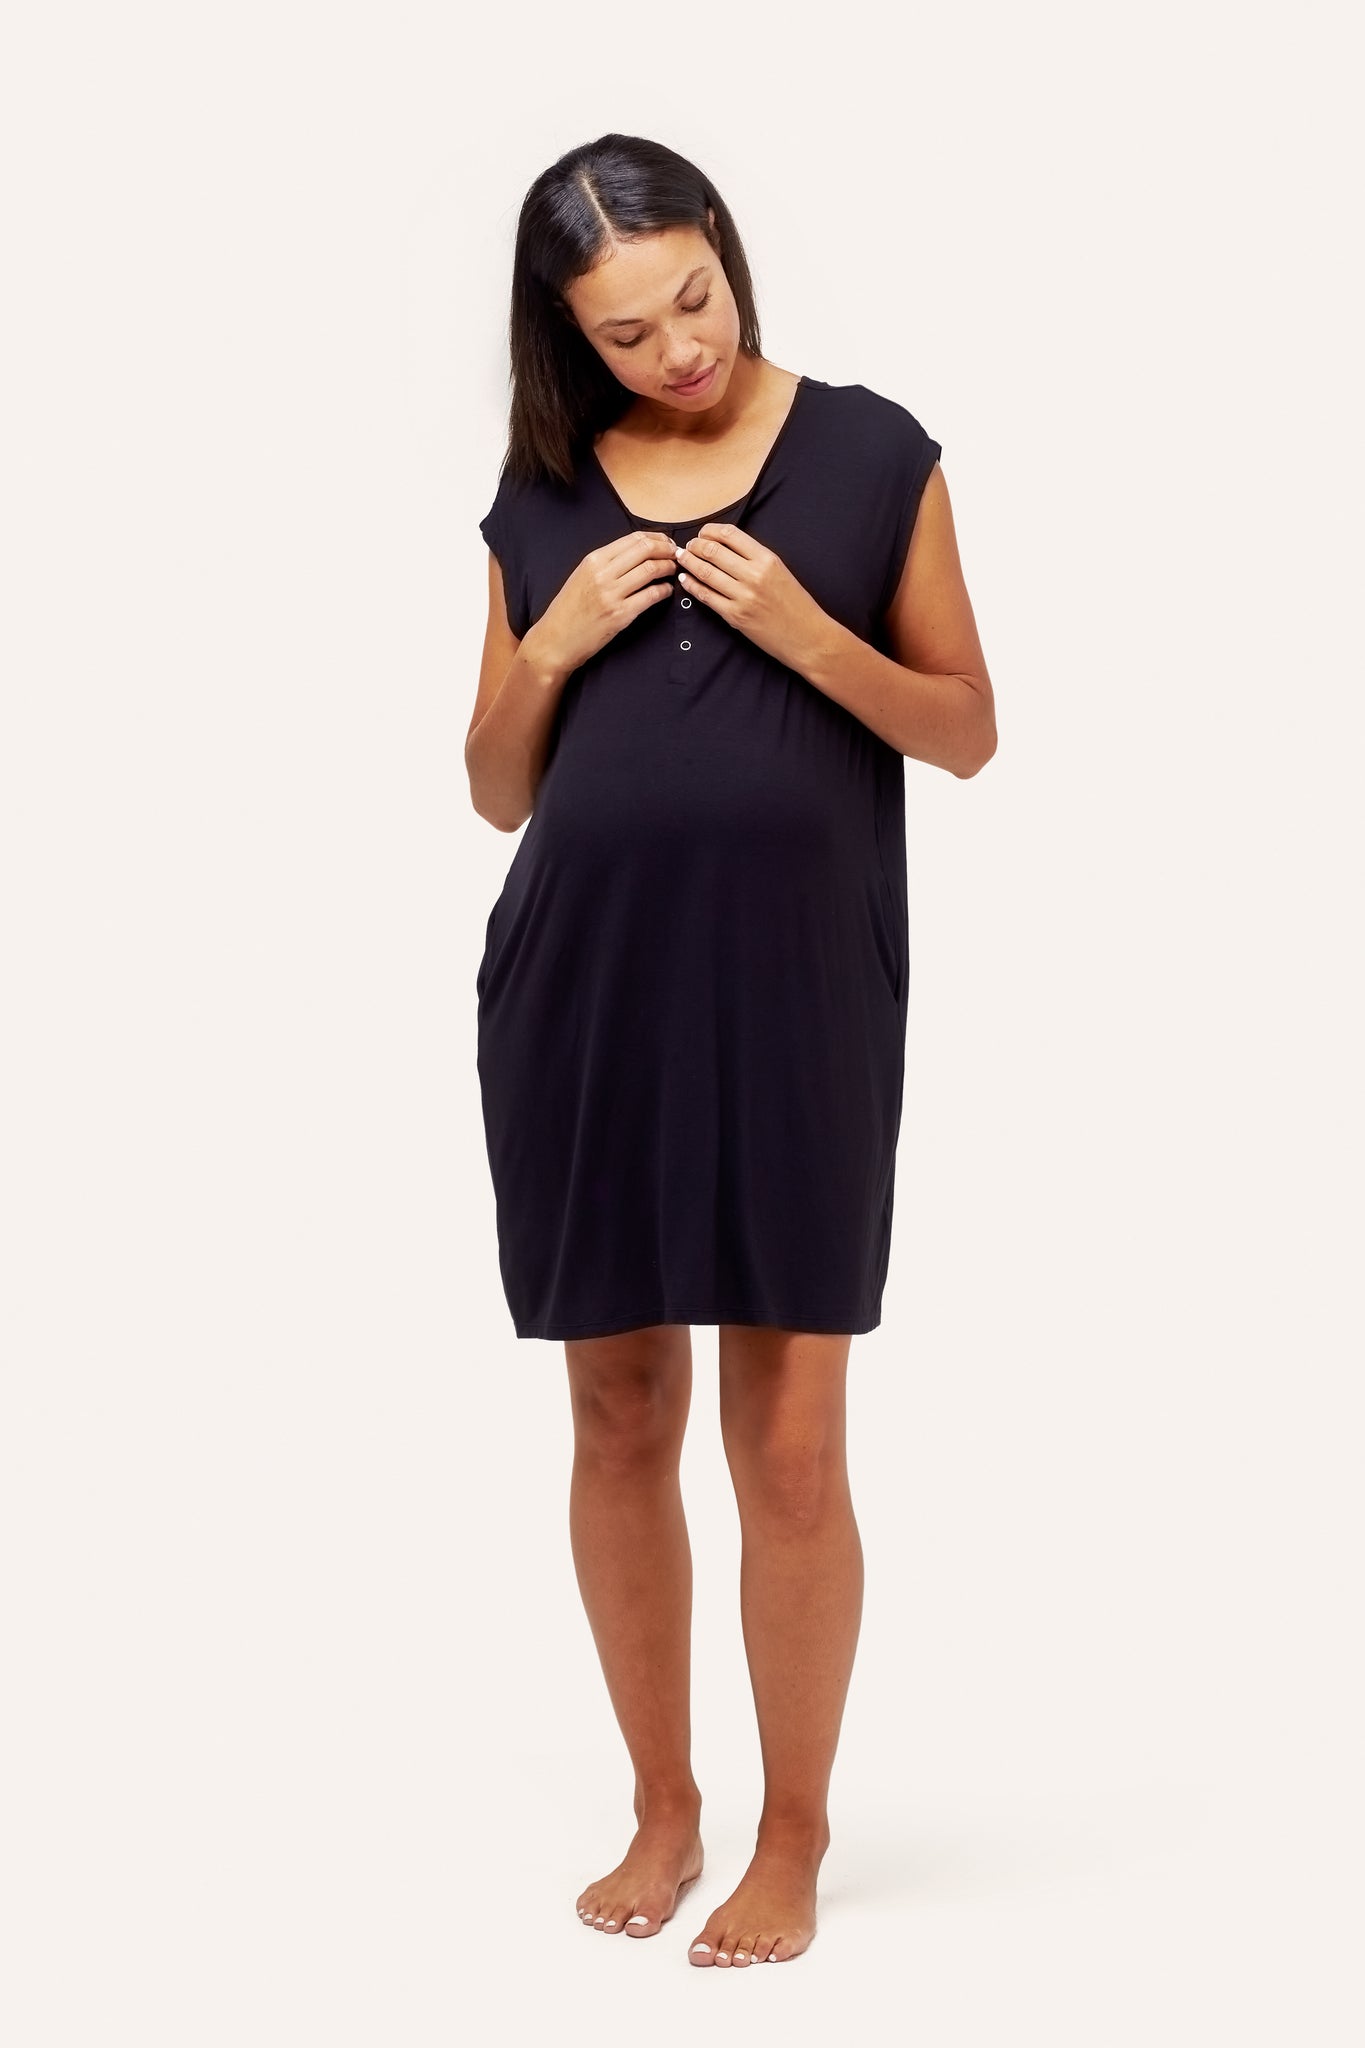 Clementine Bamboo Maternity Nursing Delivery Sleeping Gown